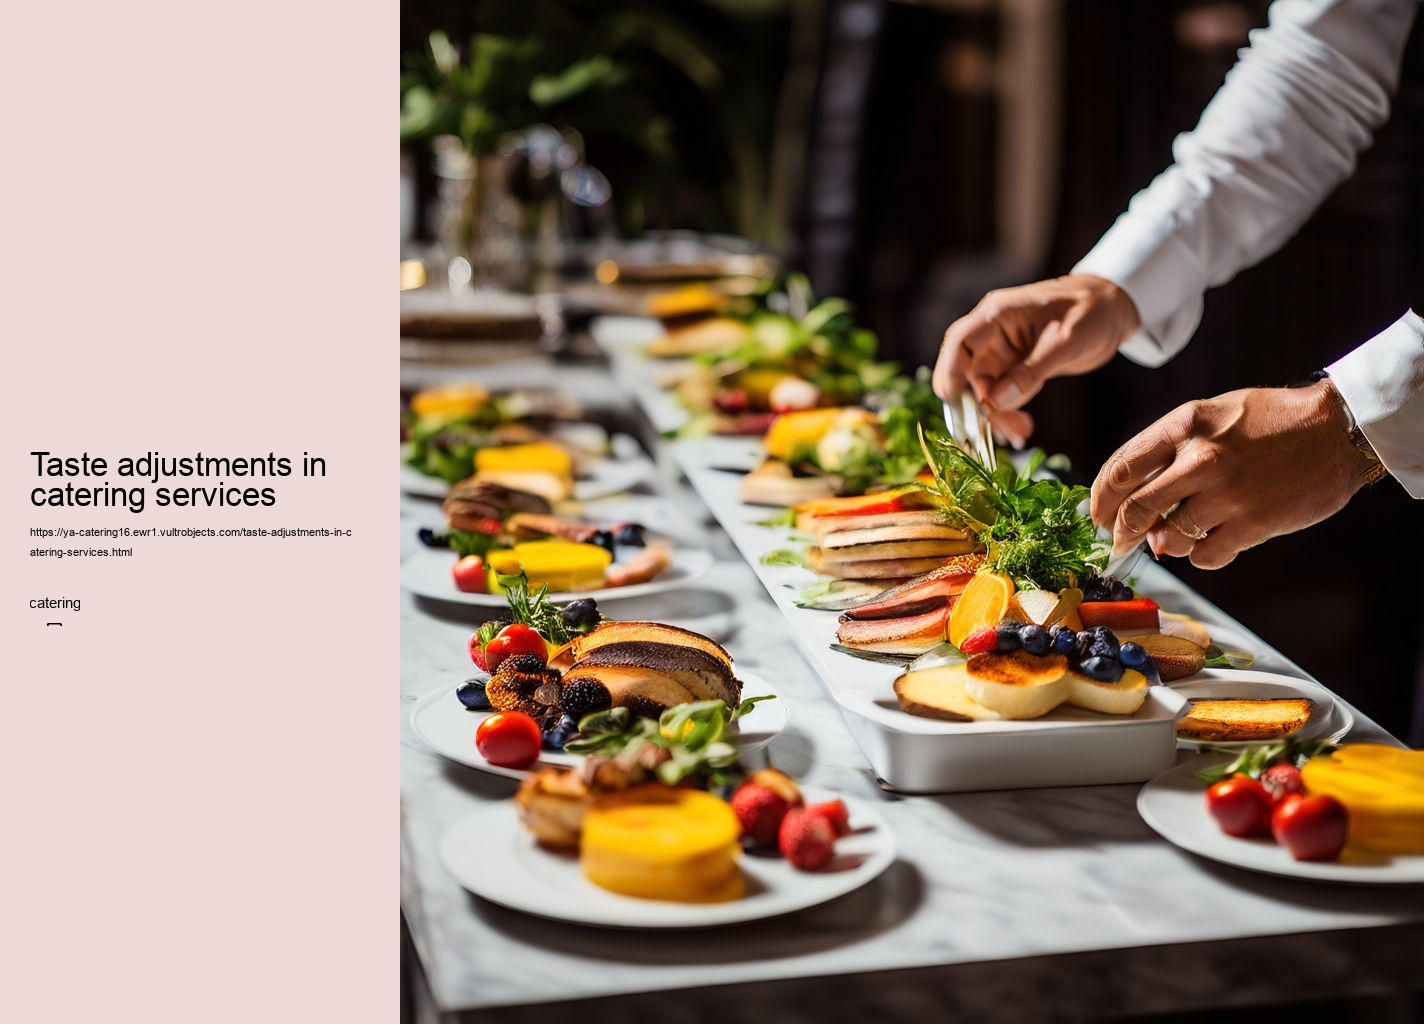 Taste adjustments in catering services